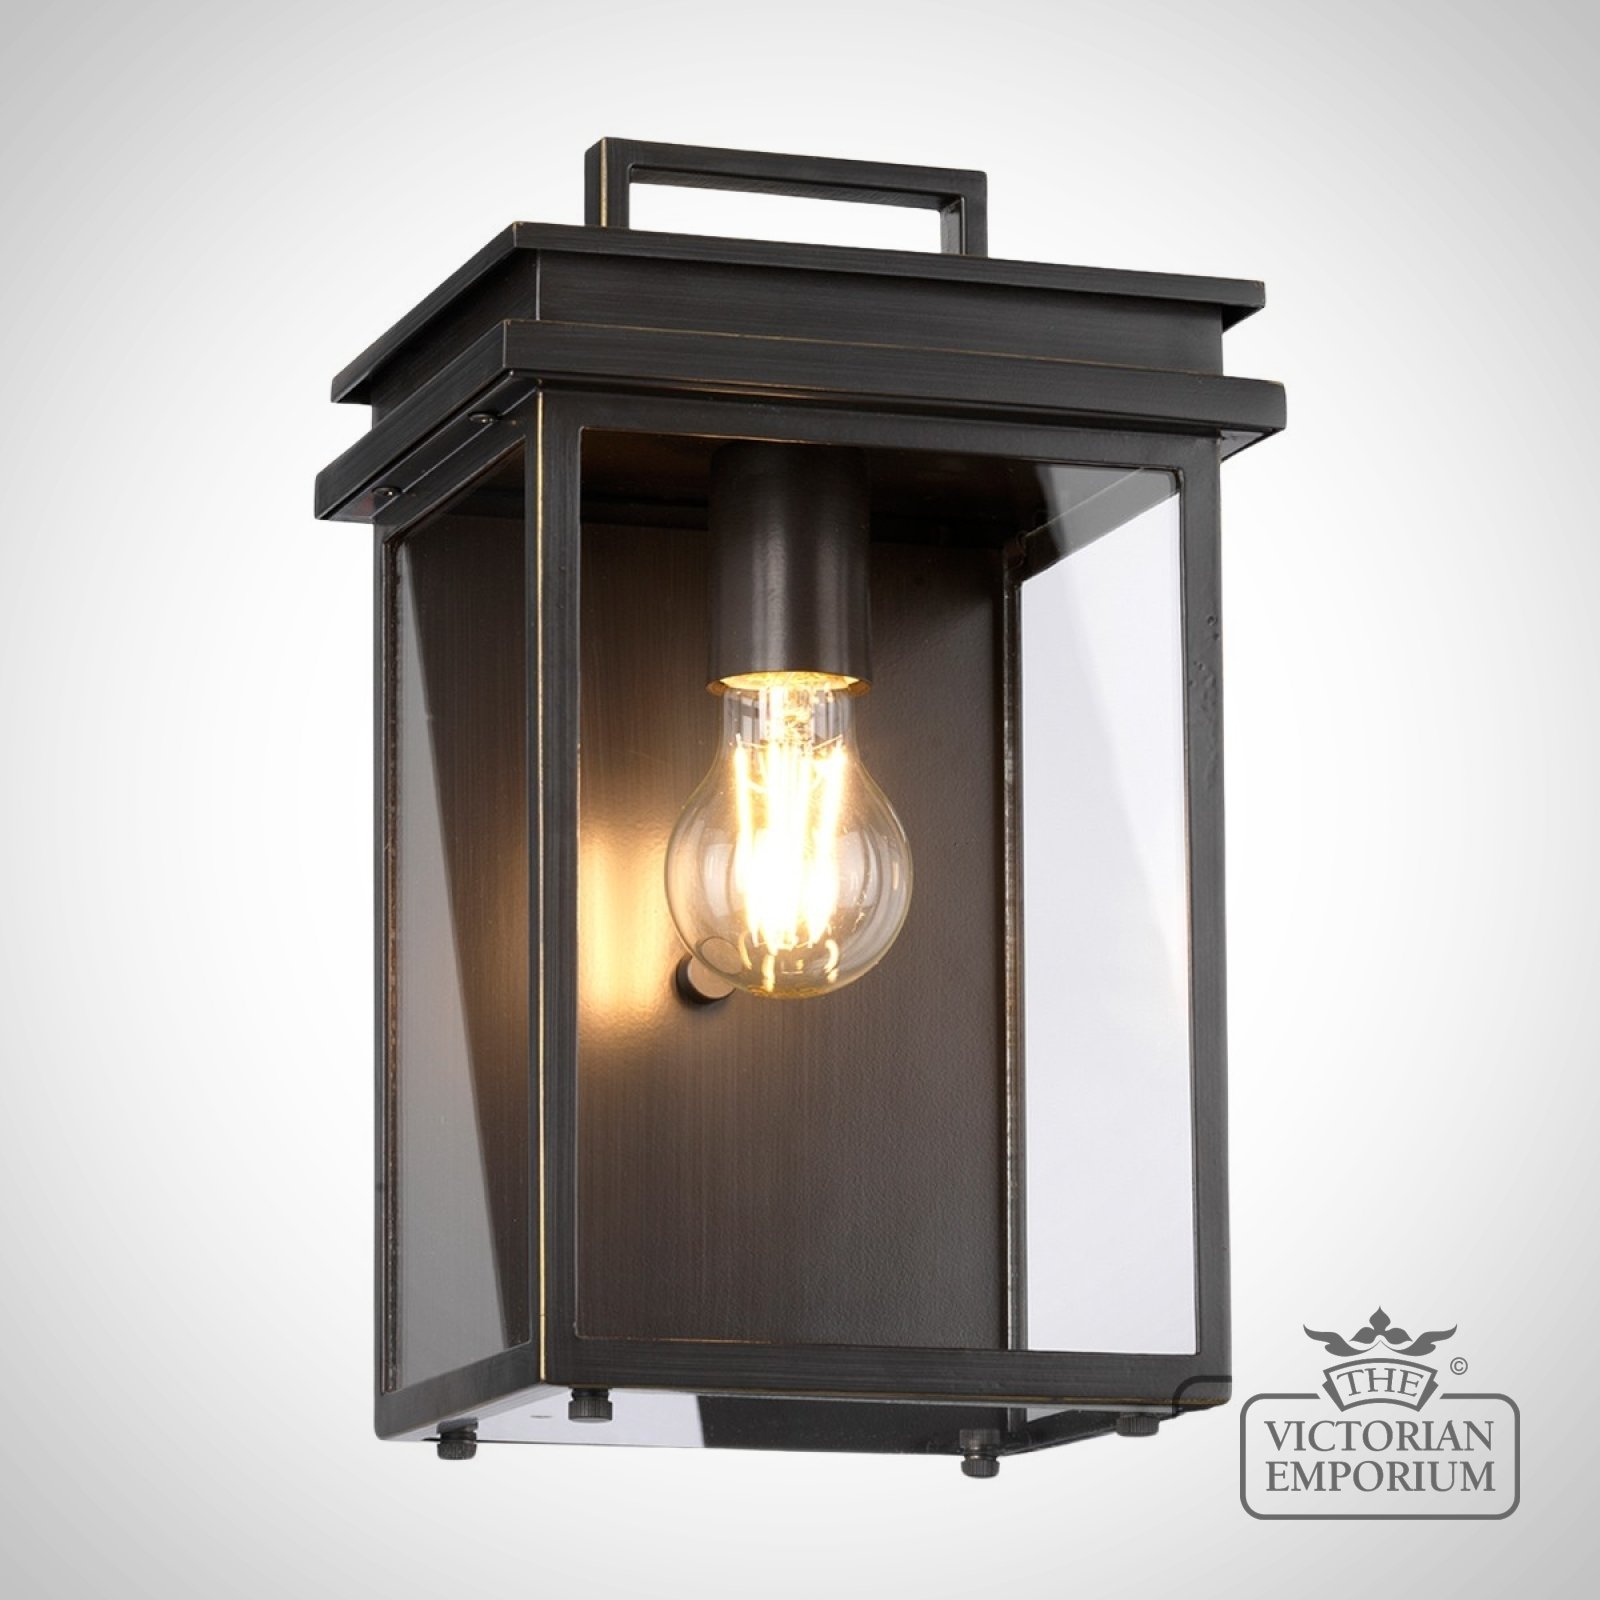 Glenview exterior wall light in bronze in a choice of sizes